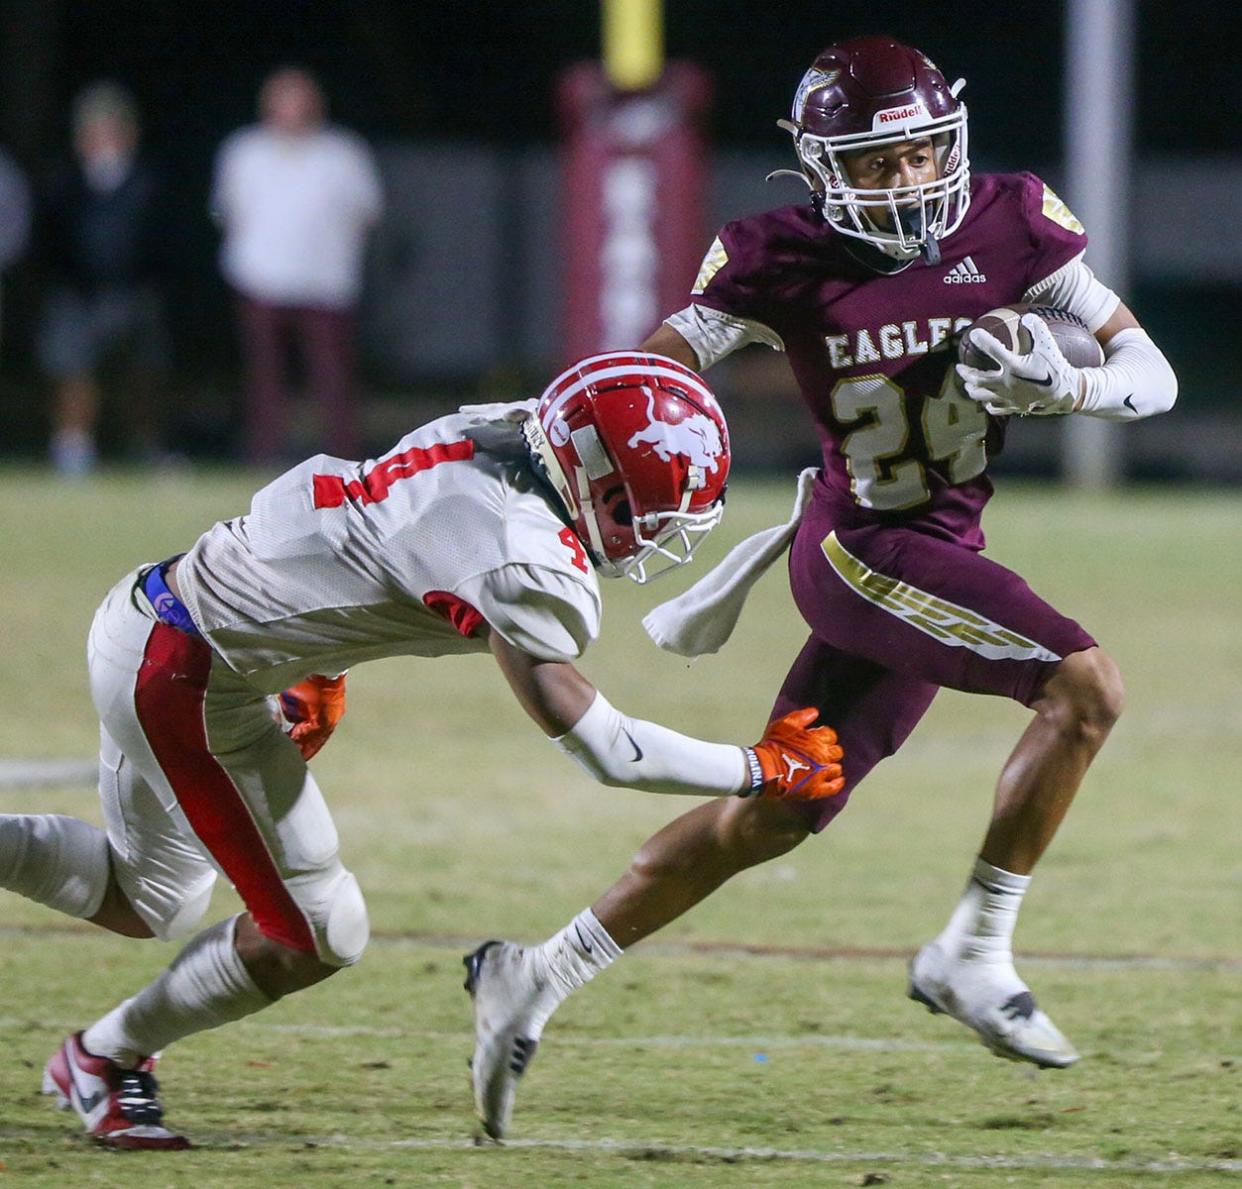 Action during the Niceville-Leon football game at Niceville.